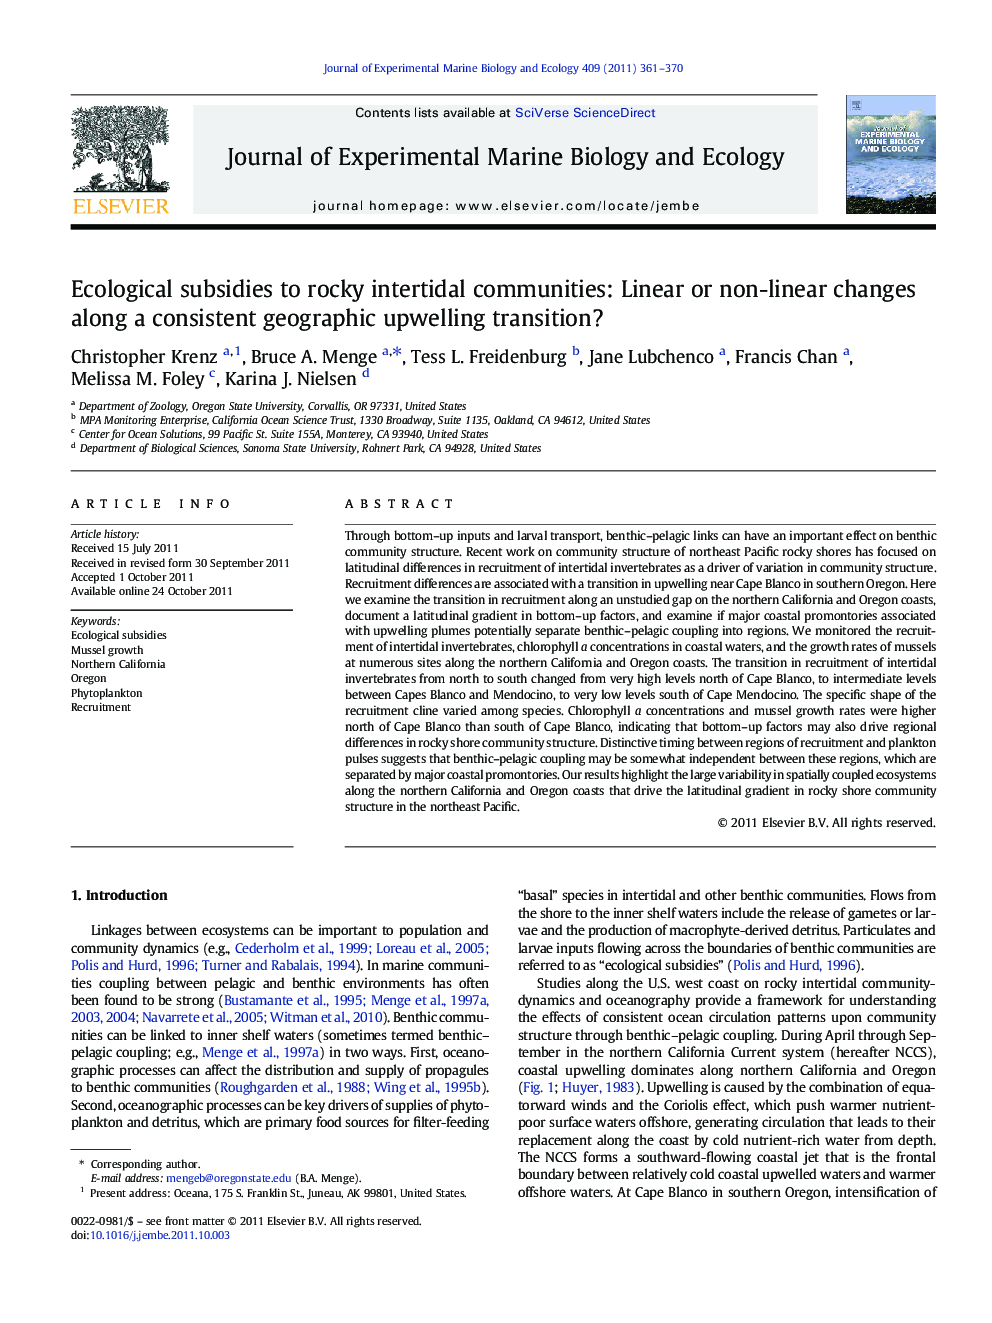 Ecological subsidies to rocky intertidal communities: Linear or non-linear changes along a consistent geographic upwelling transition?